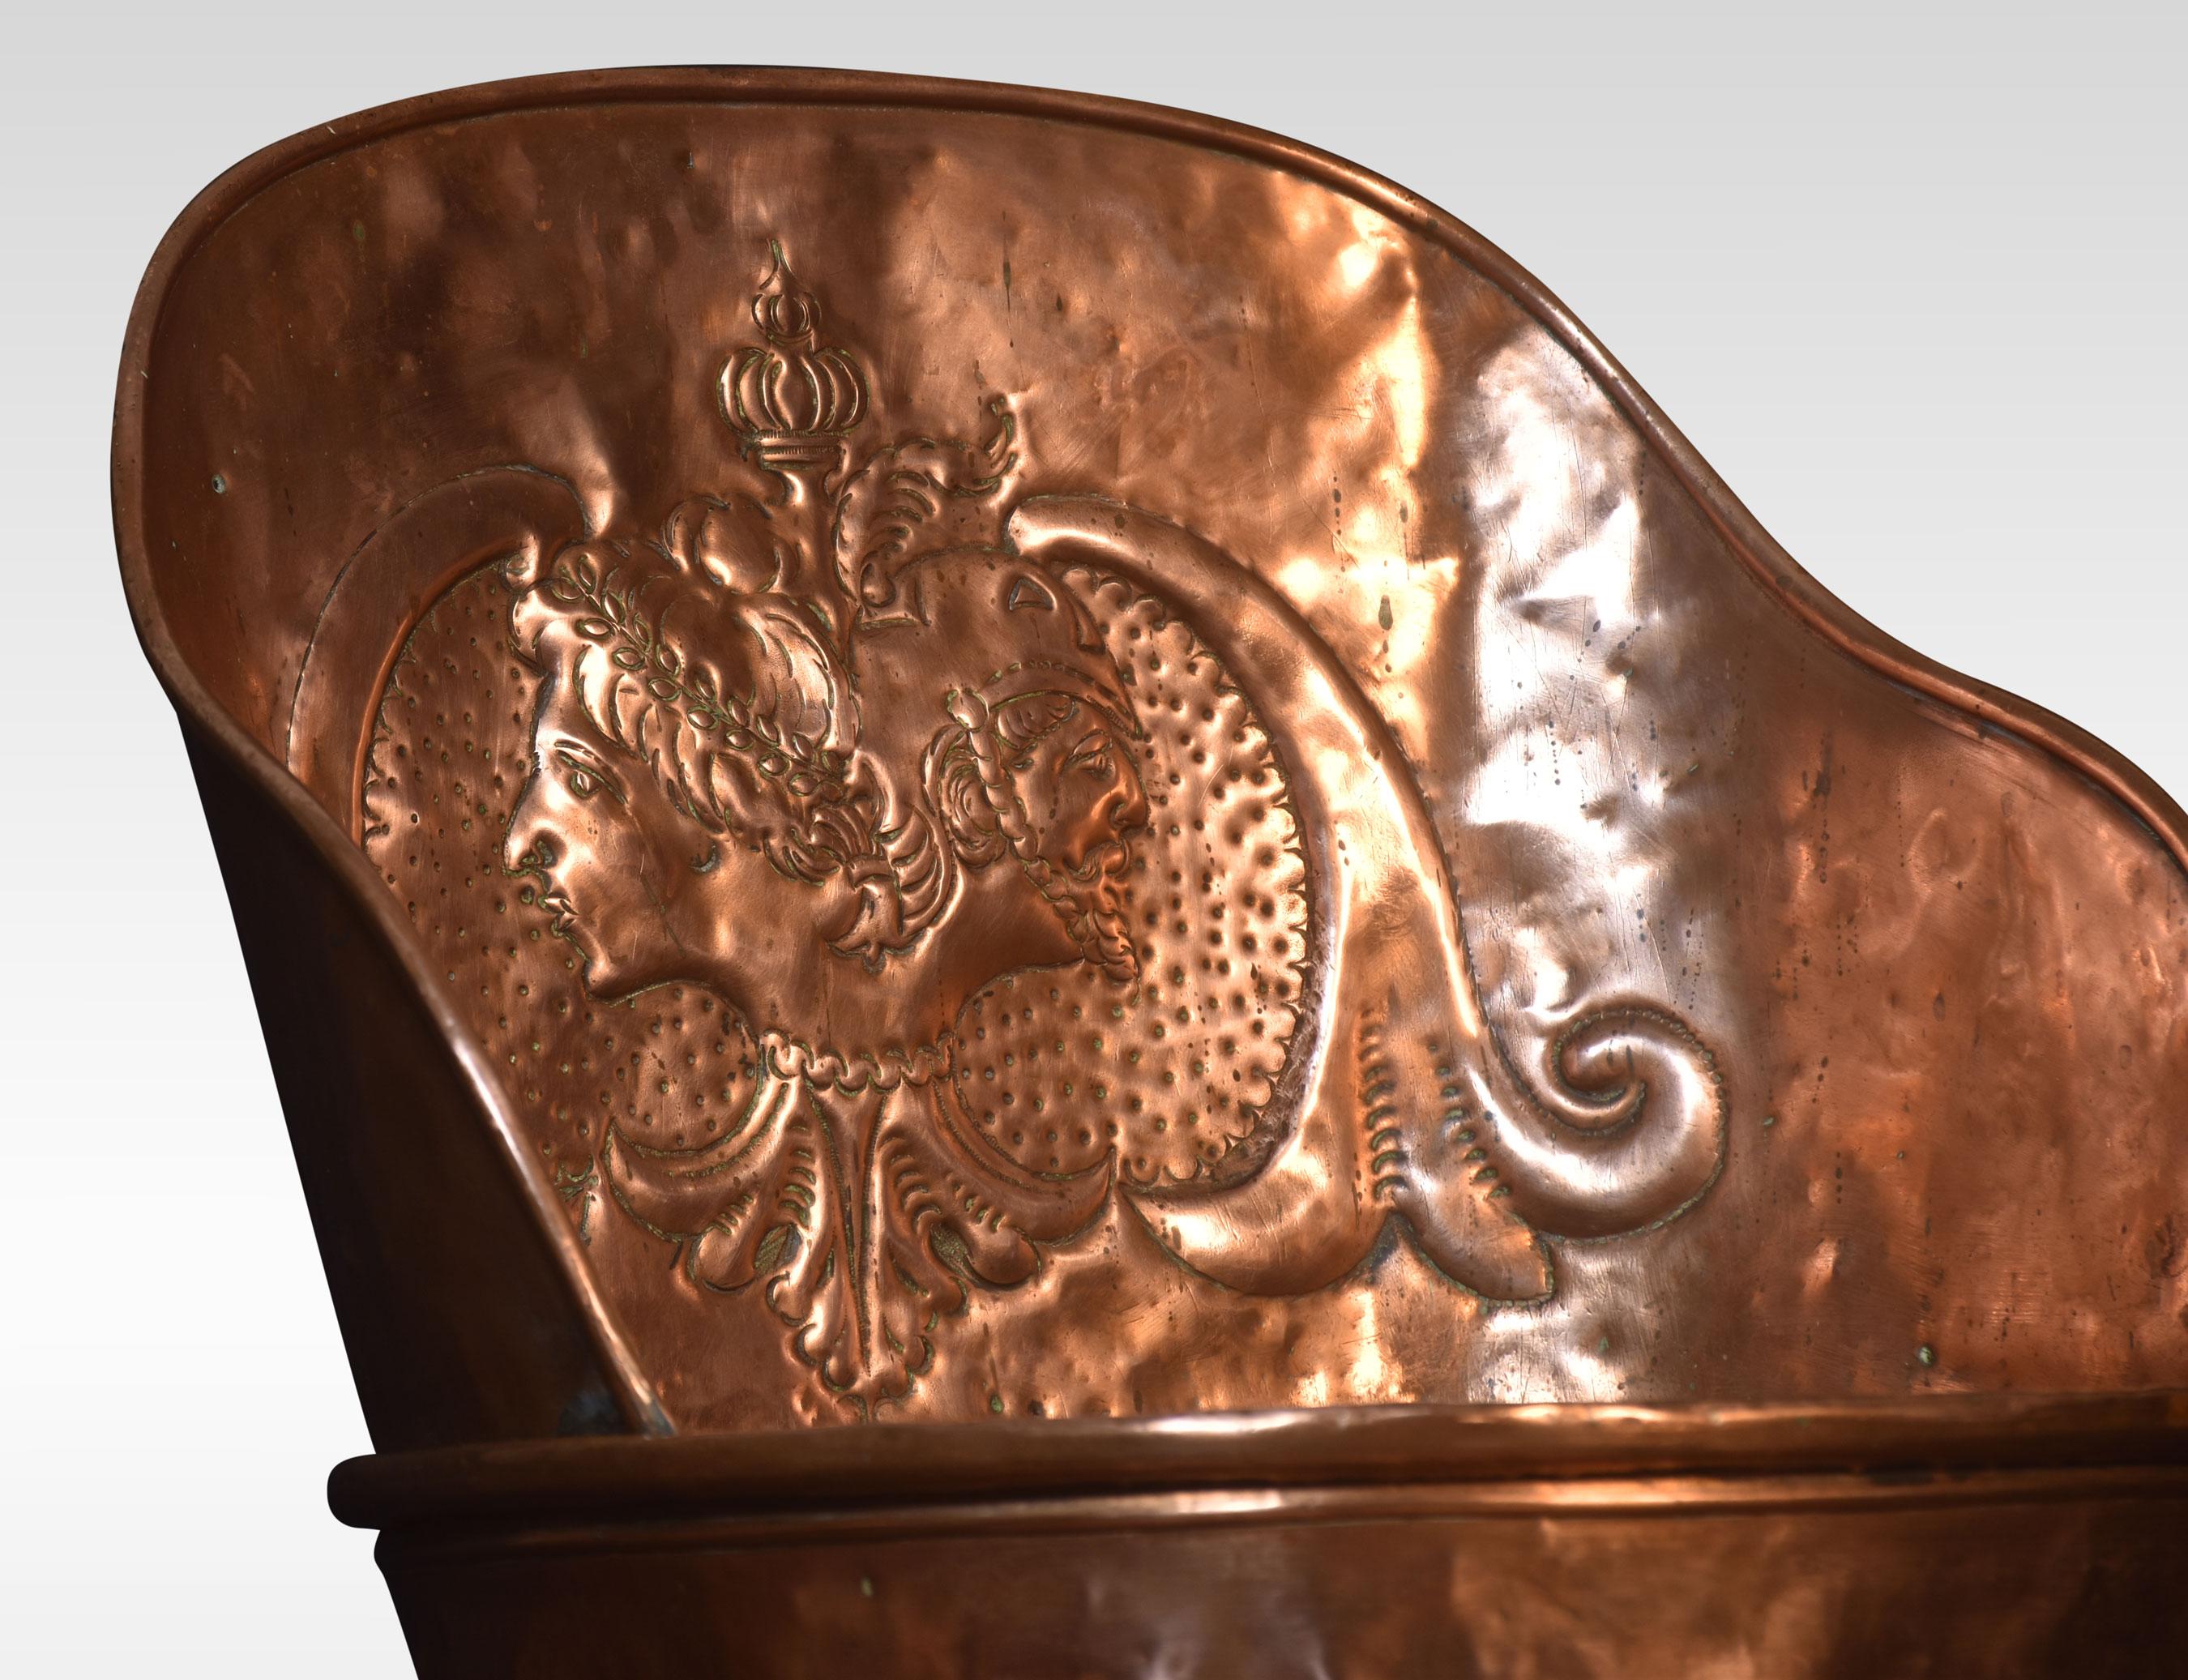 19th century large copper grape hod with embossed floral decoration raised up on circular stepped base.
Dimensions
Height 33.5 inches
Width 16.5 inches
Depth 15.5 inches.